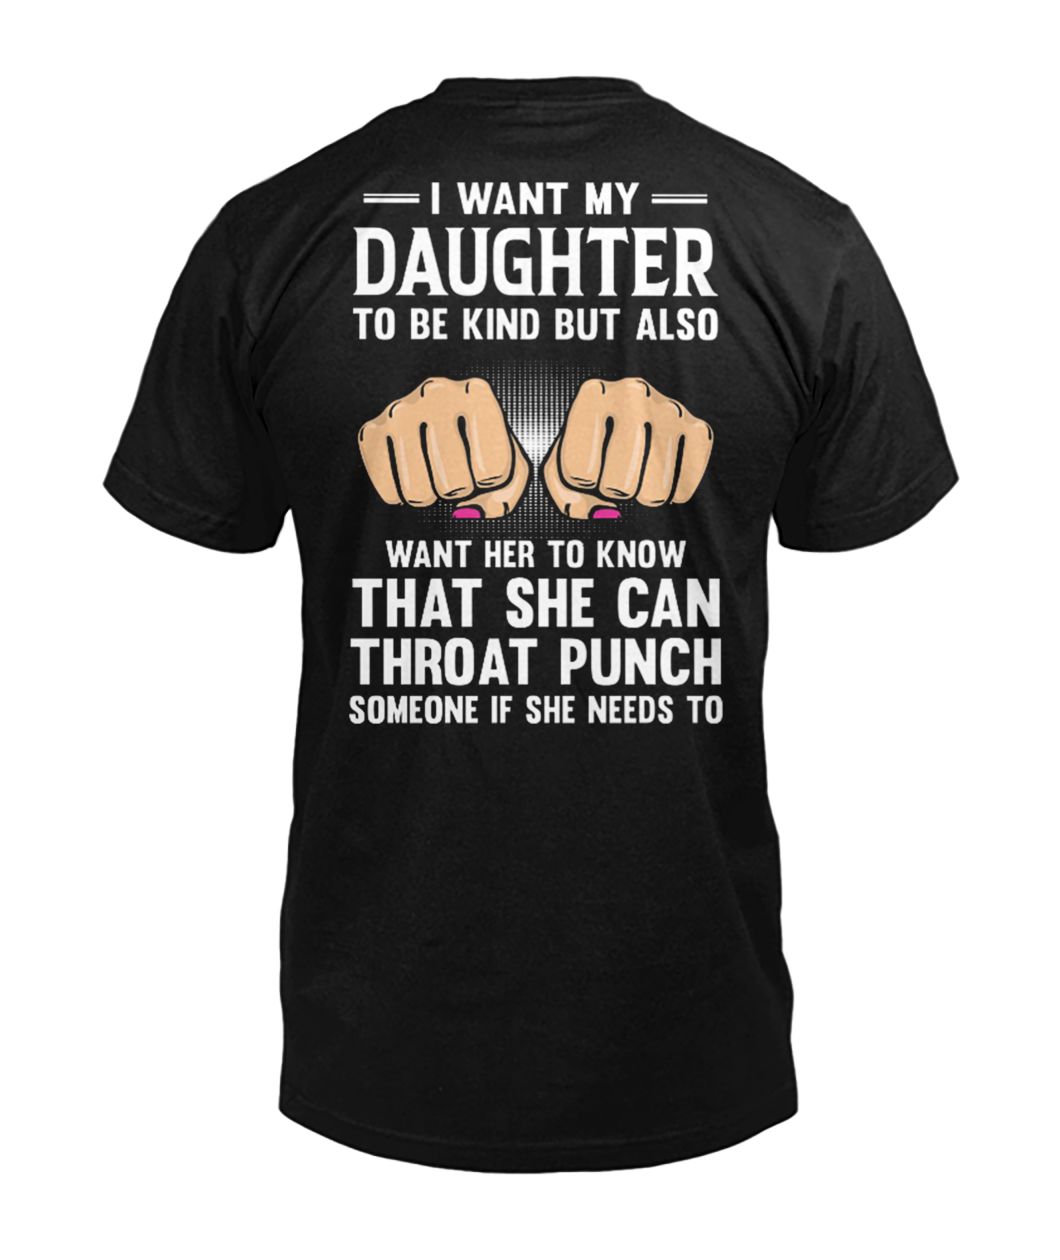 I want my daughter to be kind but also want her to know that she can throat punch mens v-neck